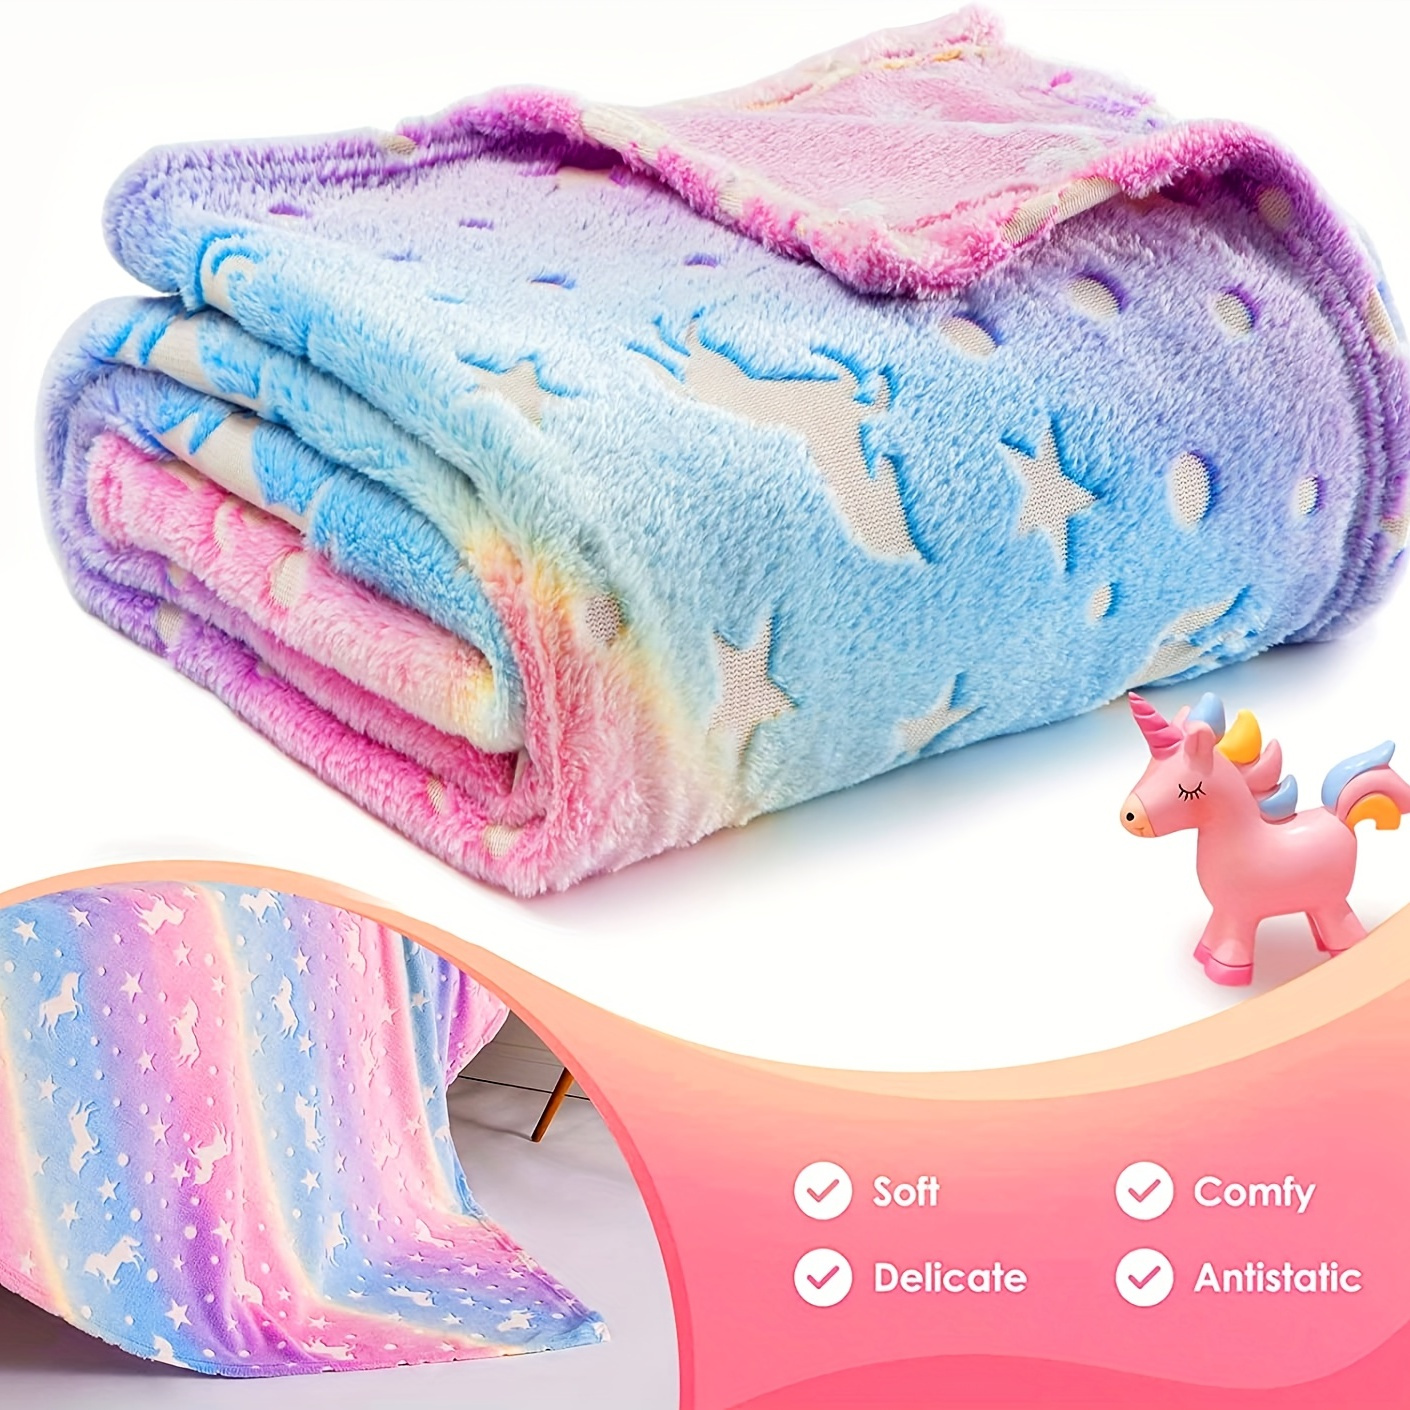 

1pc Glow In The Dark Rainbow Blanket, Cozy Soft Flannel Blanket For Sofa Bed Car Office, All Seasons Universal Bedding Blanket Birthday Gift